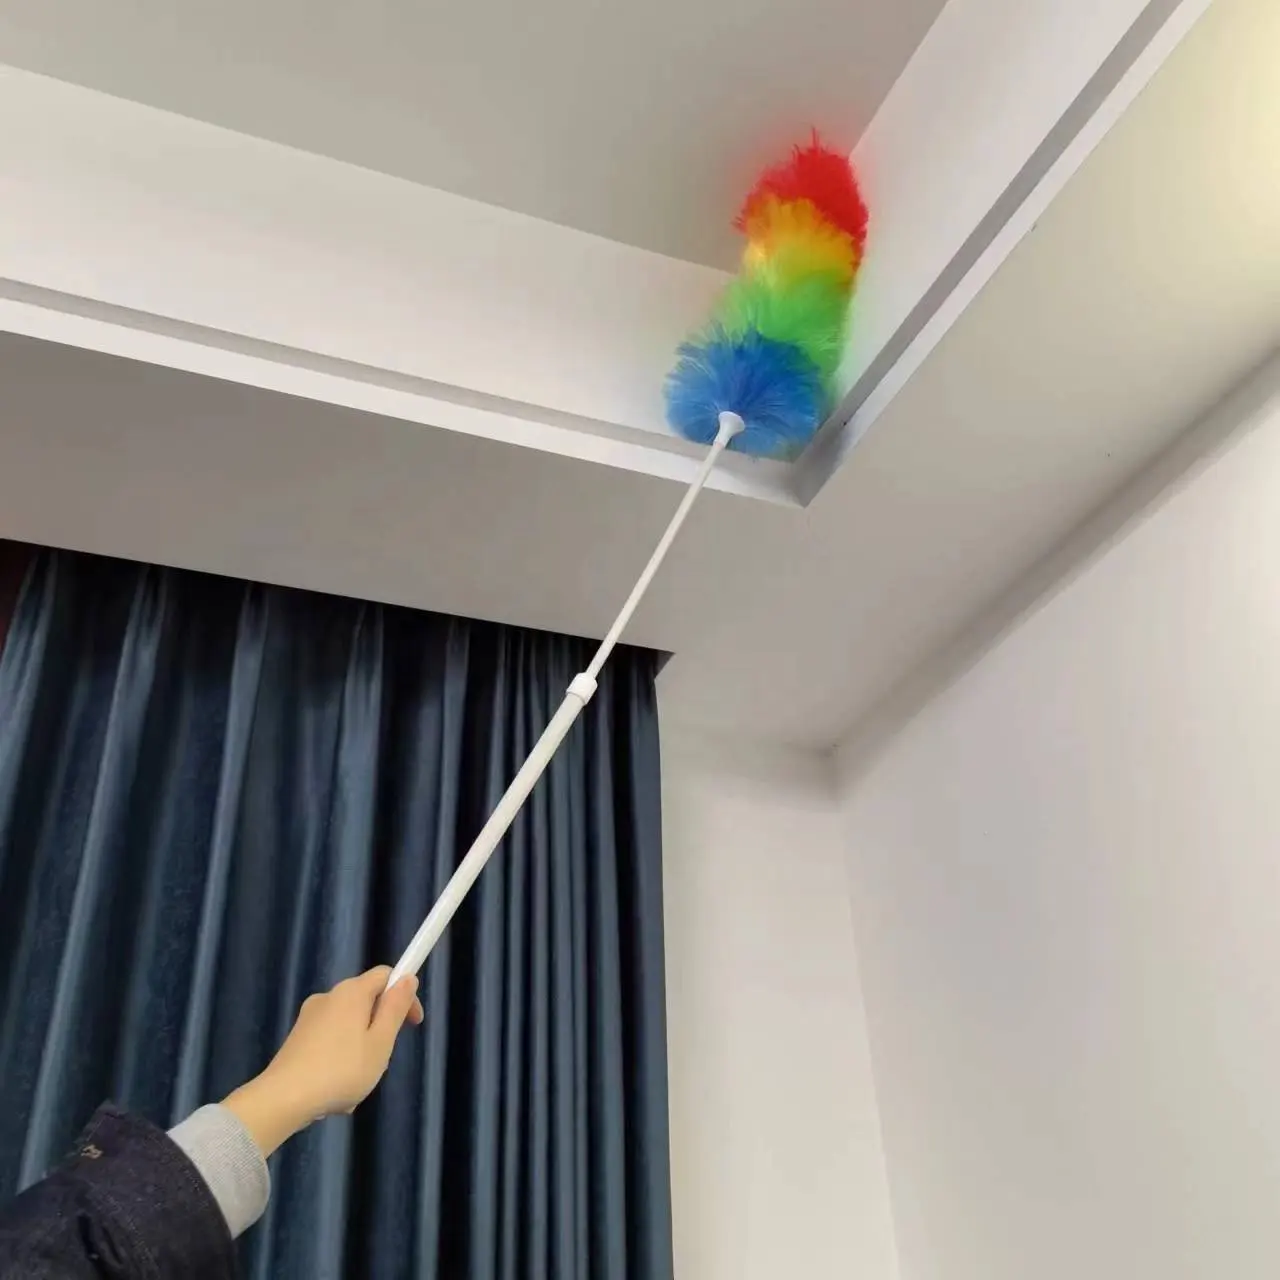 Extendable Telescopic Ceiling Fan Duster Long Handle Microfiber Duster Feather Duster for House Cleaning